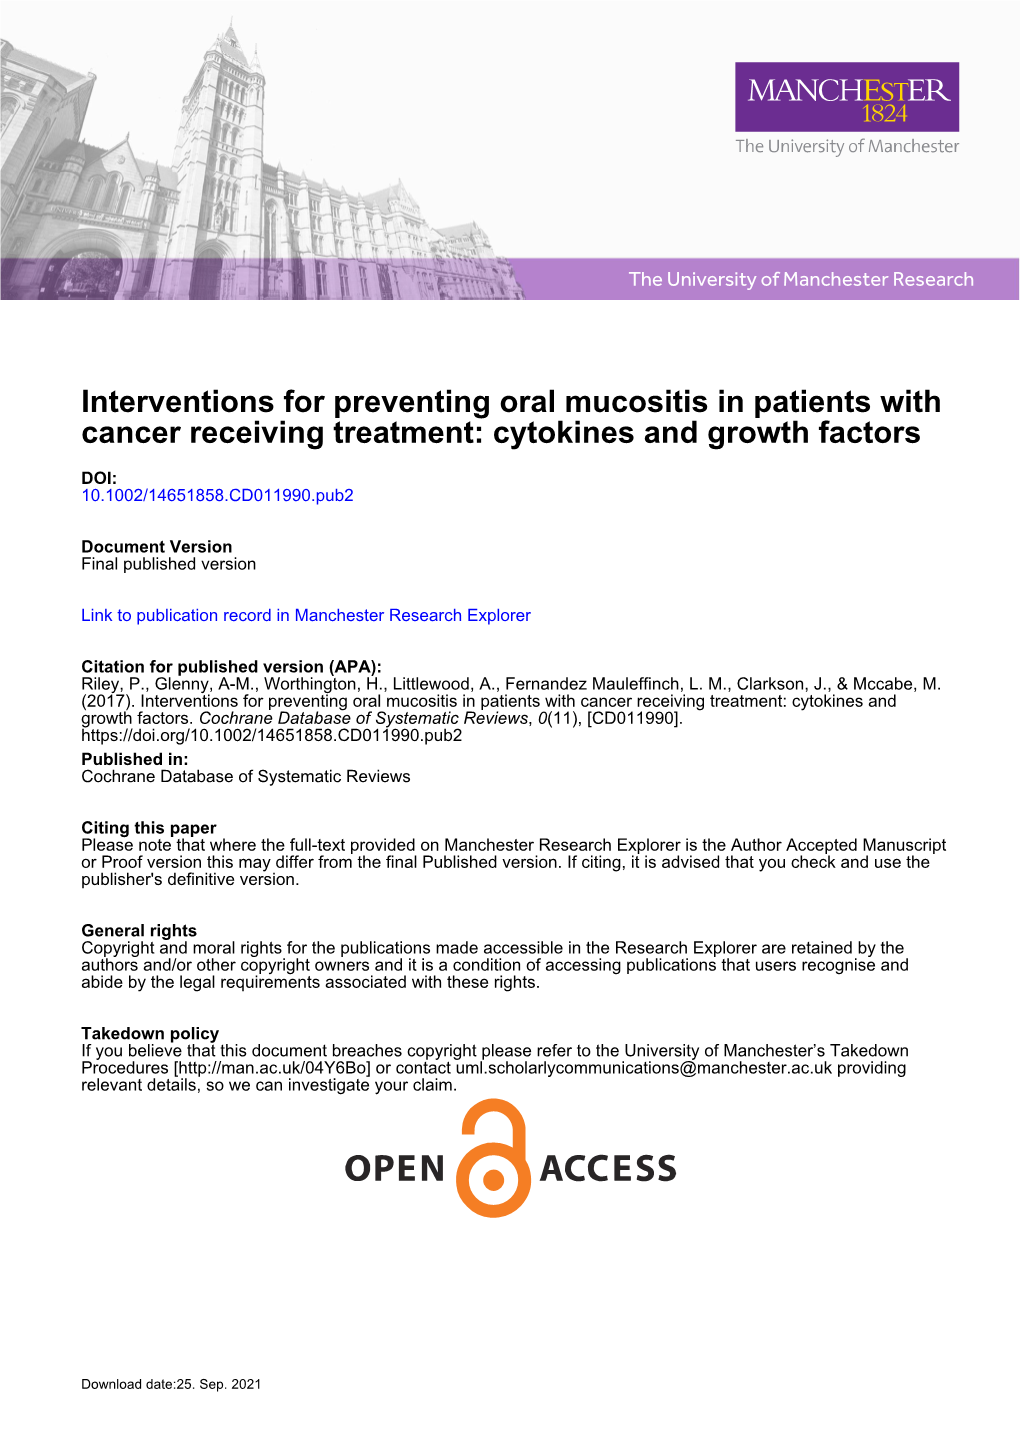 Interventions for Preventing Oral Mucositis in Patients with Cancer Receiving Treatment: Cytokines and Growth Factors